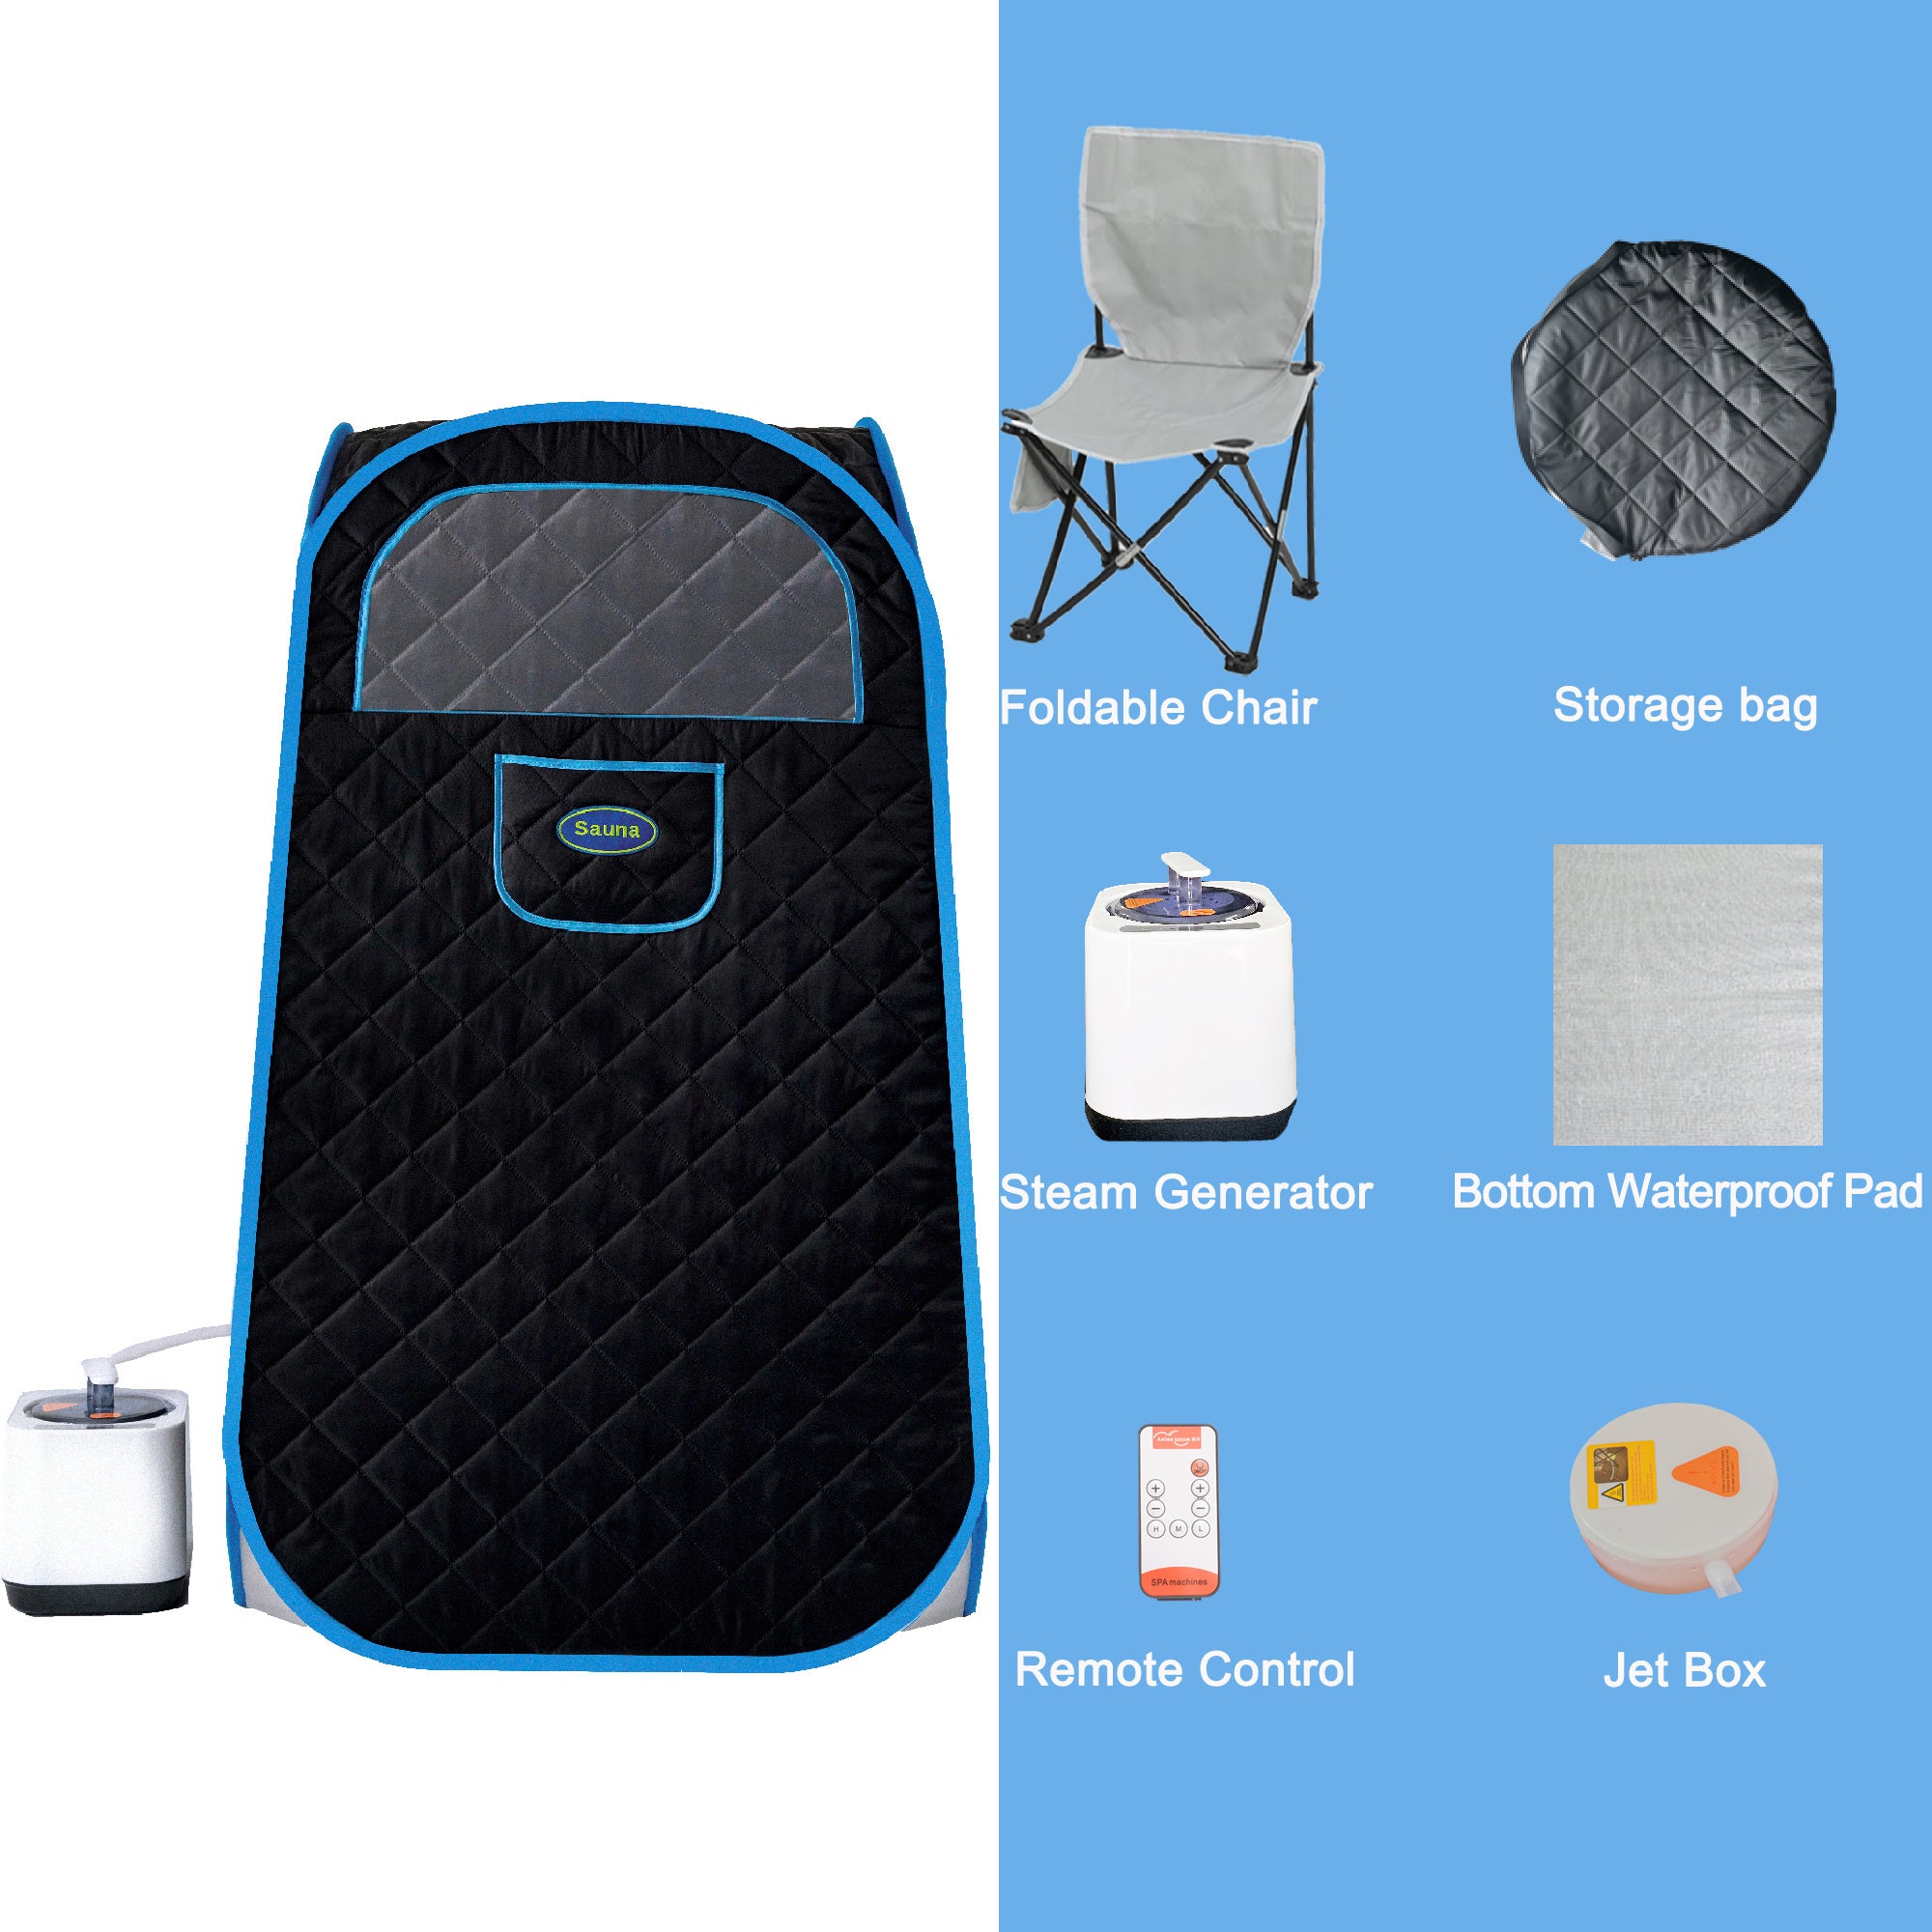 Image showing items that can fit into the Portable Folding Full size Steam Sauna with 1000W&2.2L steam Generator.